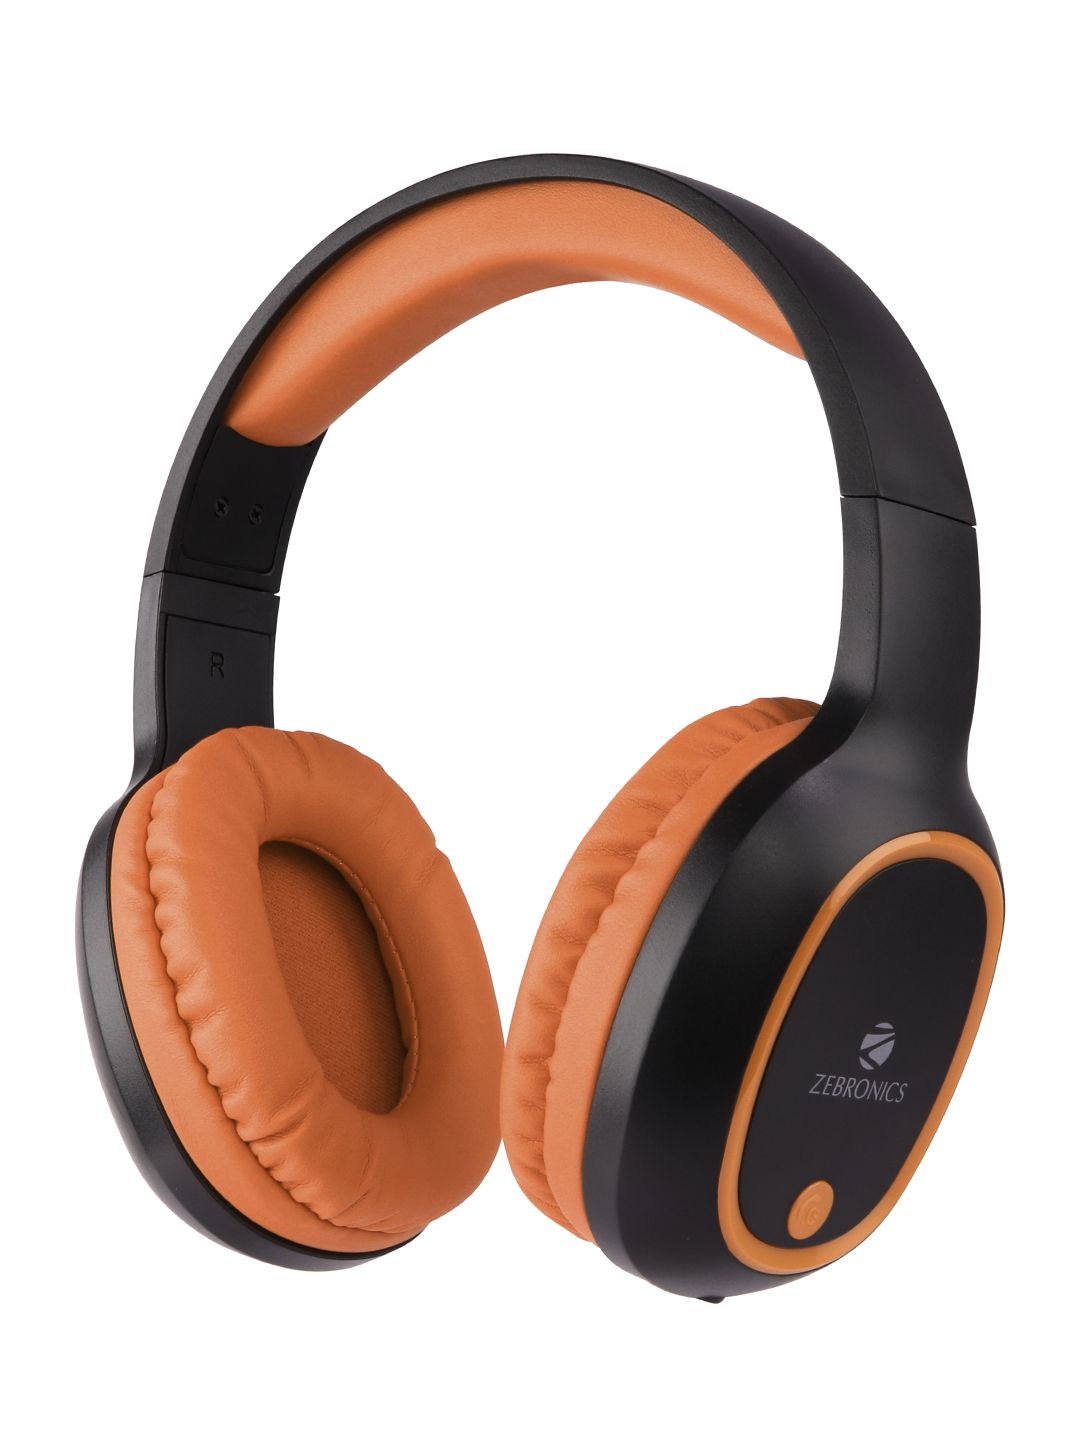 ZEBRONICS Zeb-Thunder Wireless Bluetooth Over The Ear Headphone with Mic - Brown Price in India